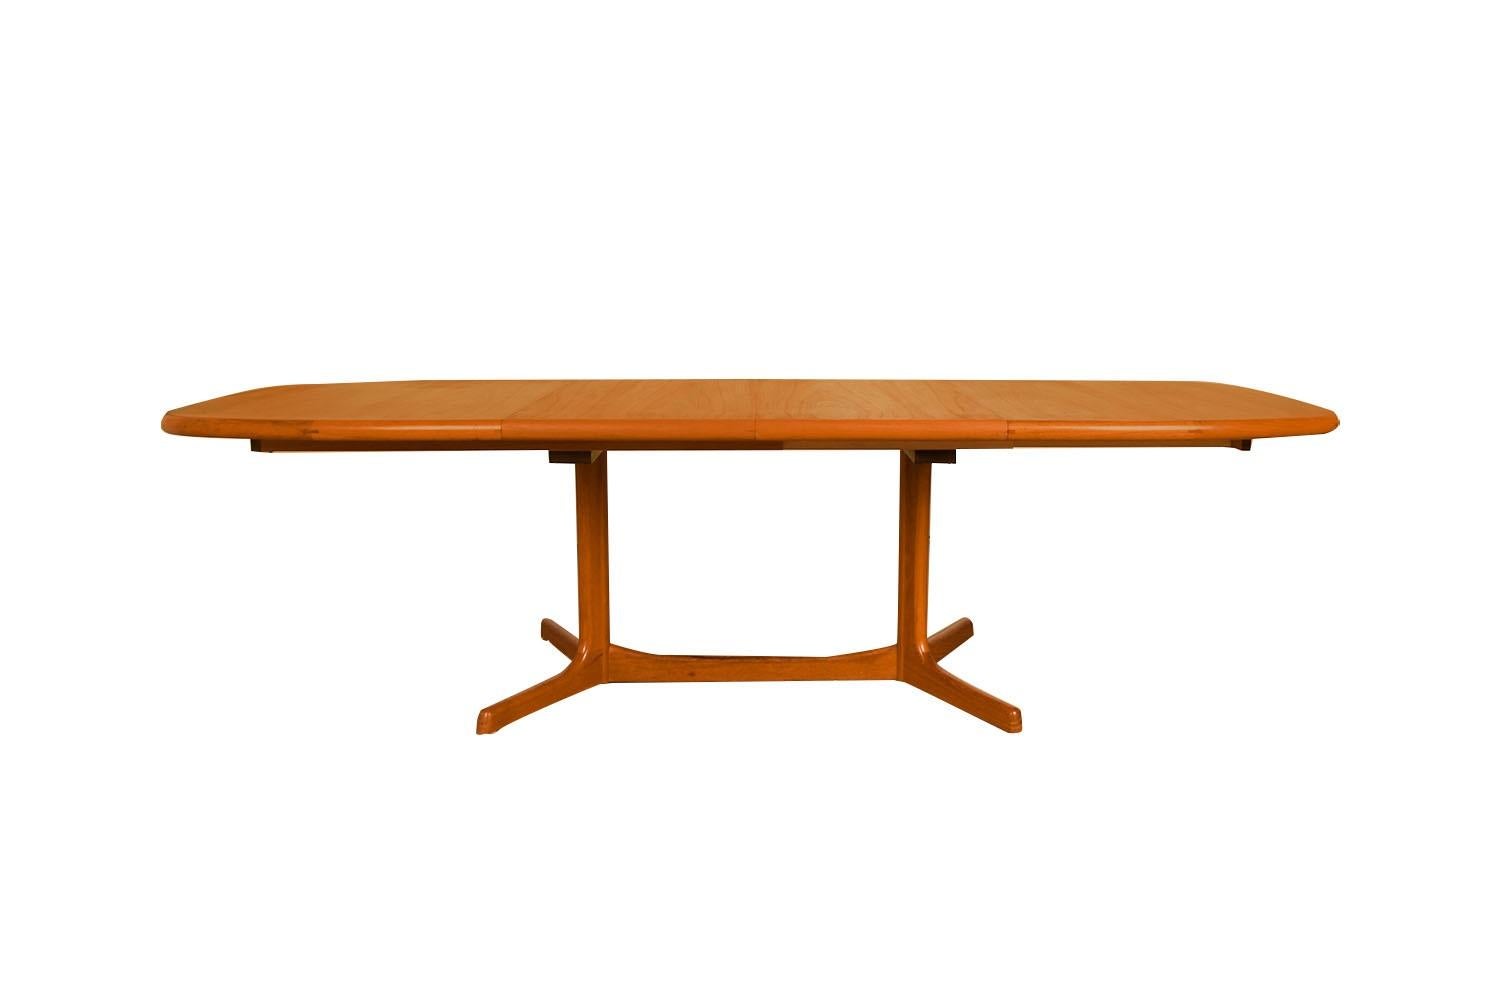 Beautiful Mid-Century Modern expandable dining table, circa 1970’s by Dyrlund. Featuring richly grained, gleaming teak and smooth, clean lines characteristic of classic Danish design. Maker’s label (Dyrlund made in Denmark) present on underside.